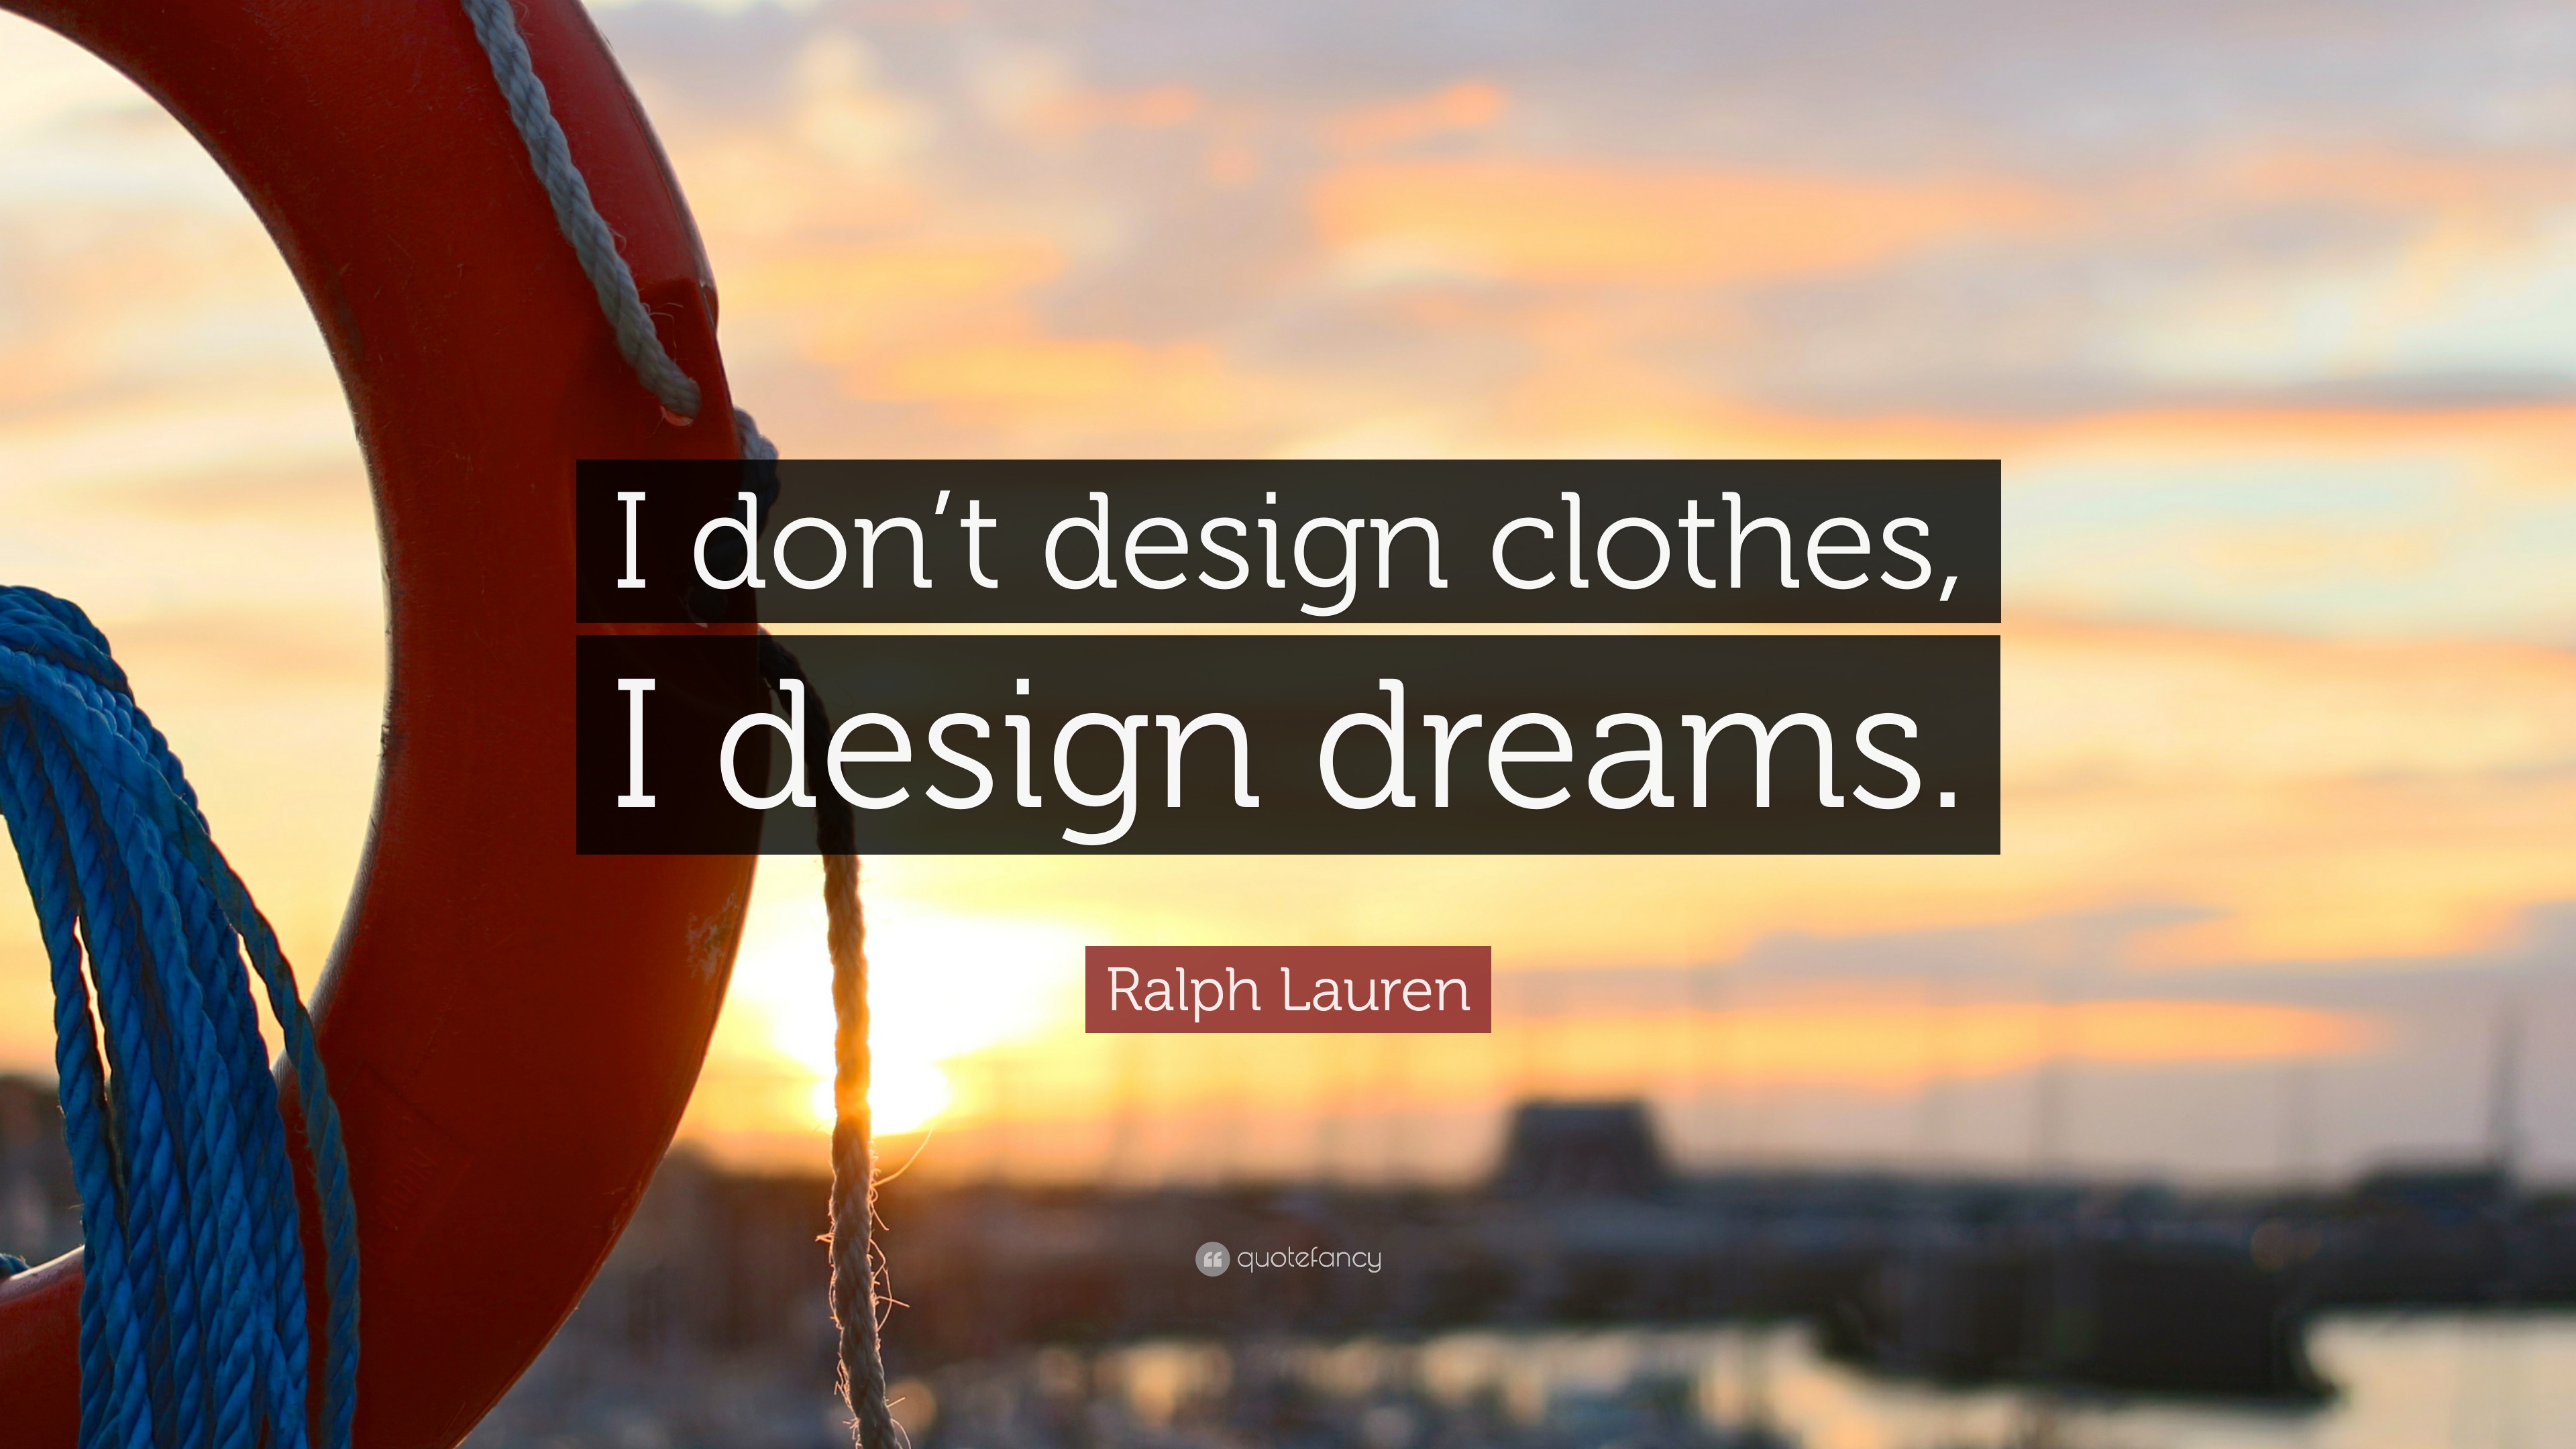 It's not about fabric, it's about dreams': how Ralph Lauren